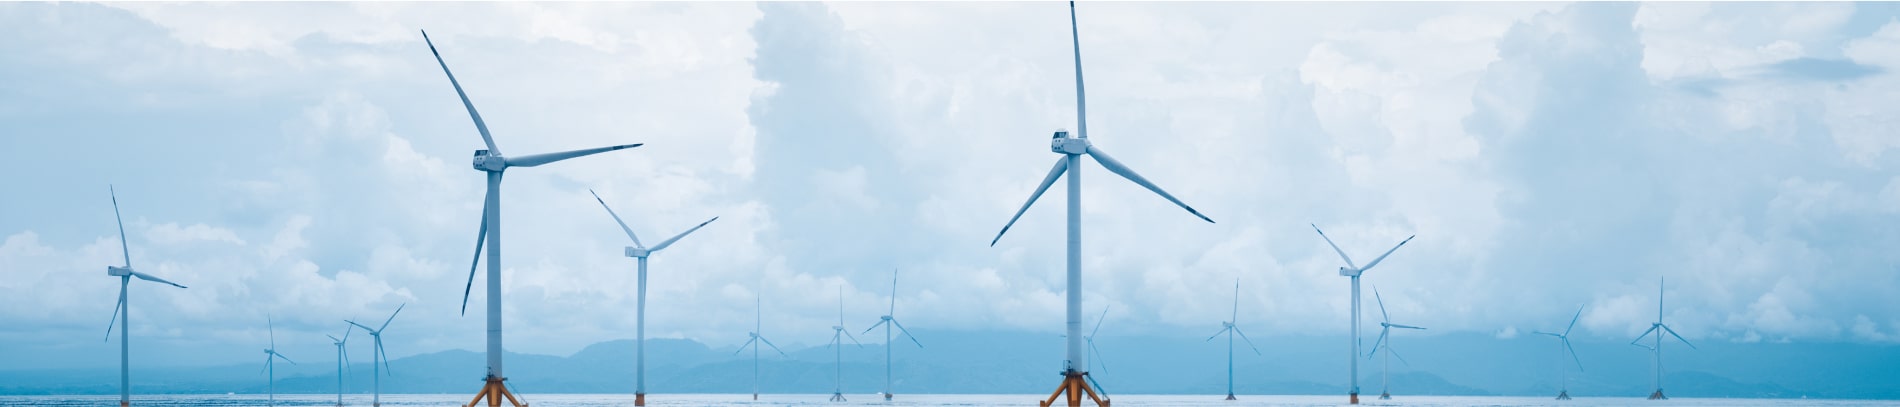 HEREMA - Offshore Wind Energy Pages